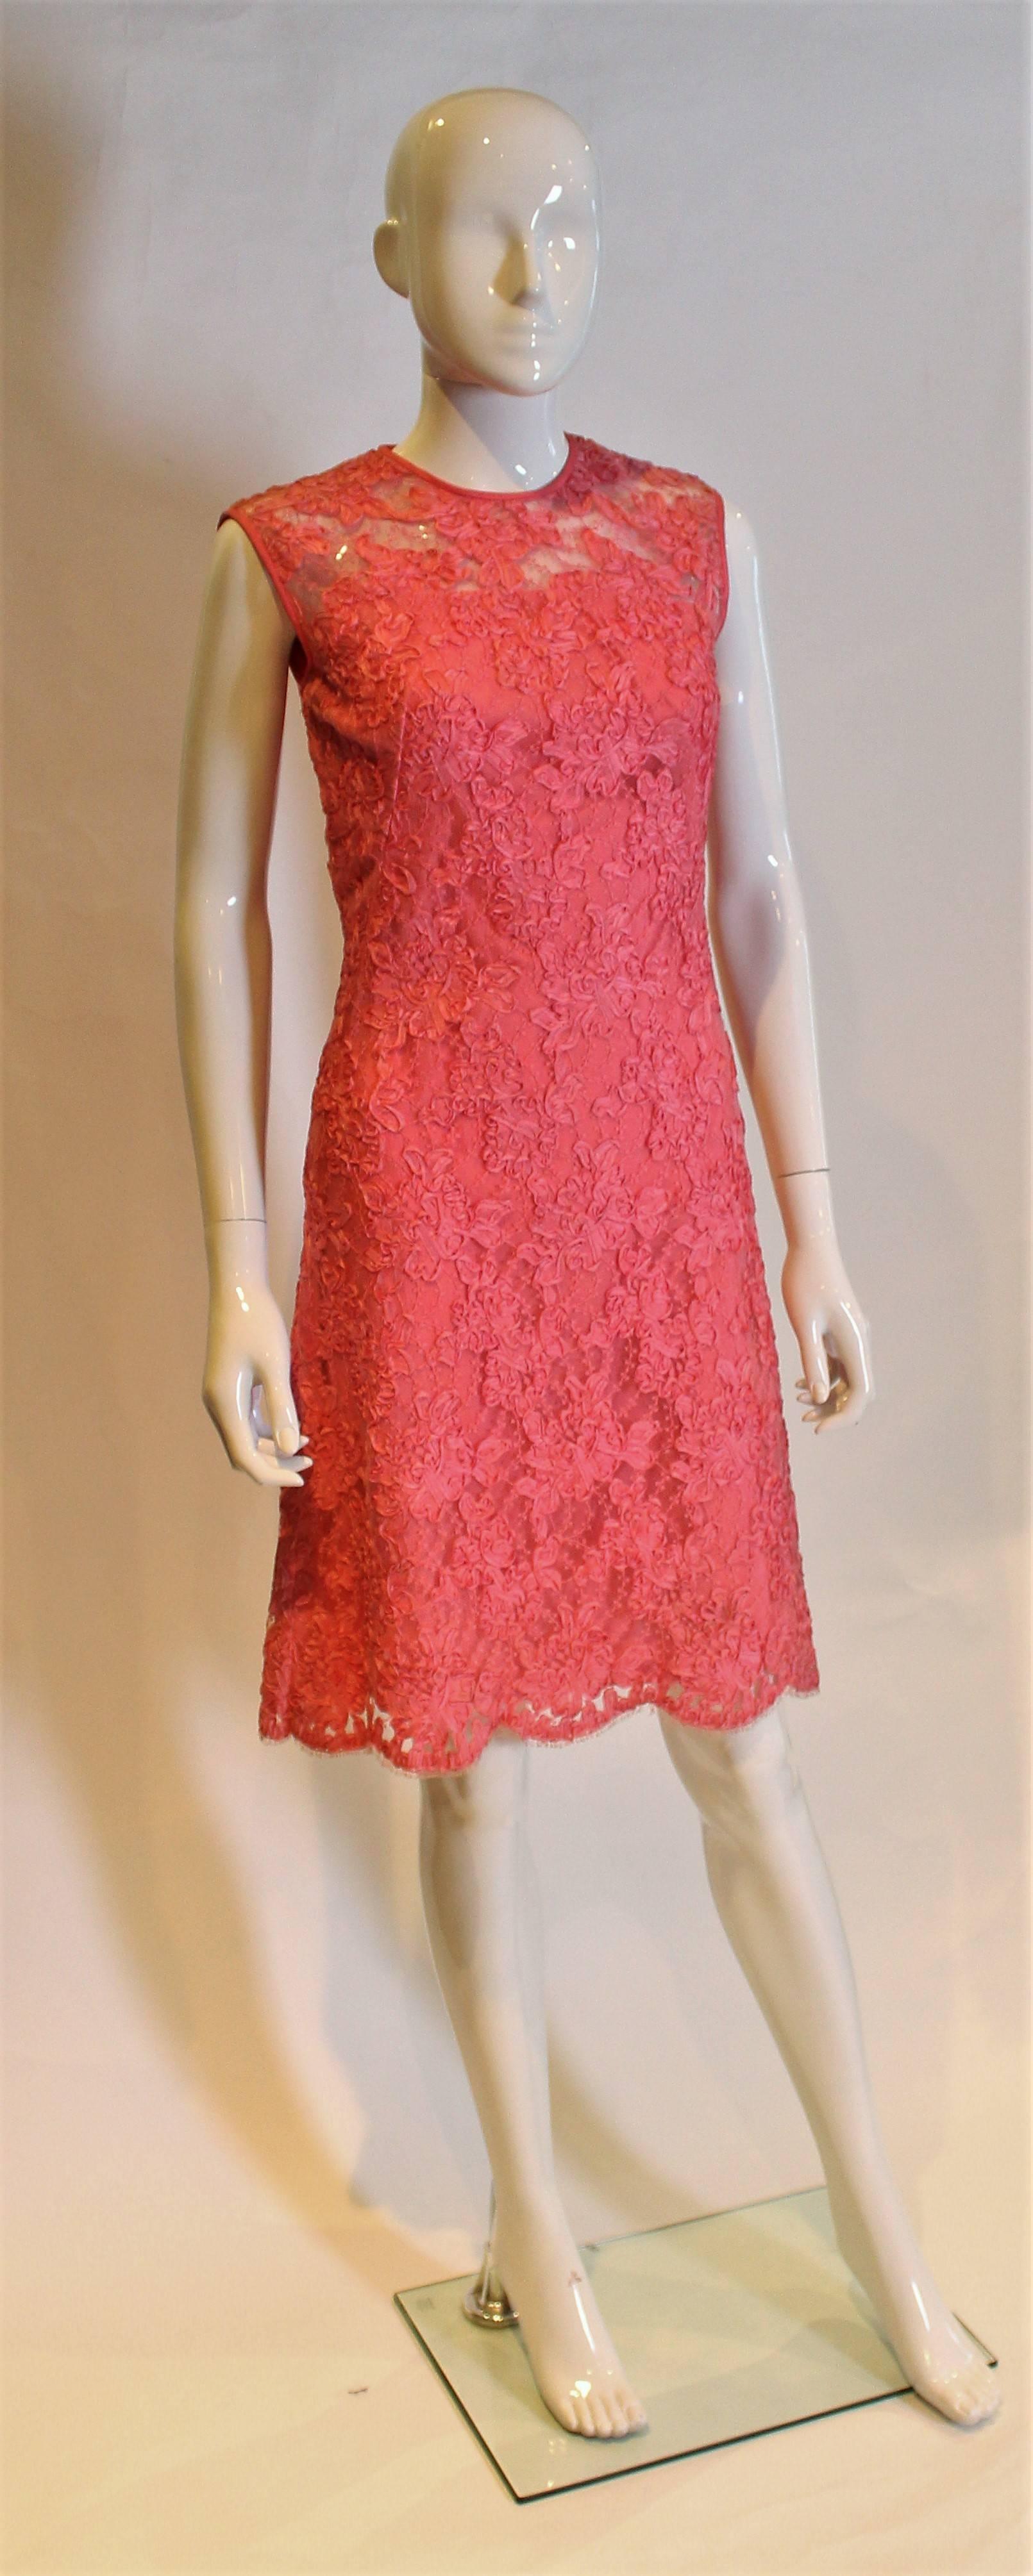 A chic and pretty dress by Wendy. This dress has a round neck and sheer net and ribbon at the top of the bust area, and is lined below. It has a key hole opening at the back, with a central back zip  and scalloped hem.